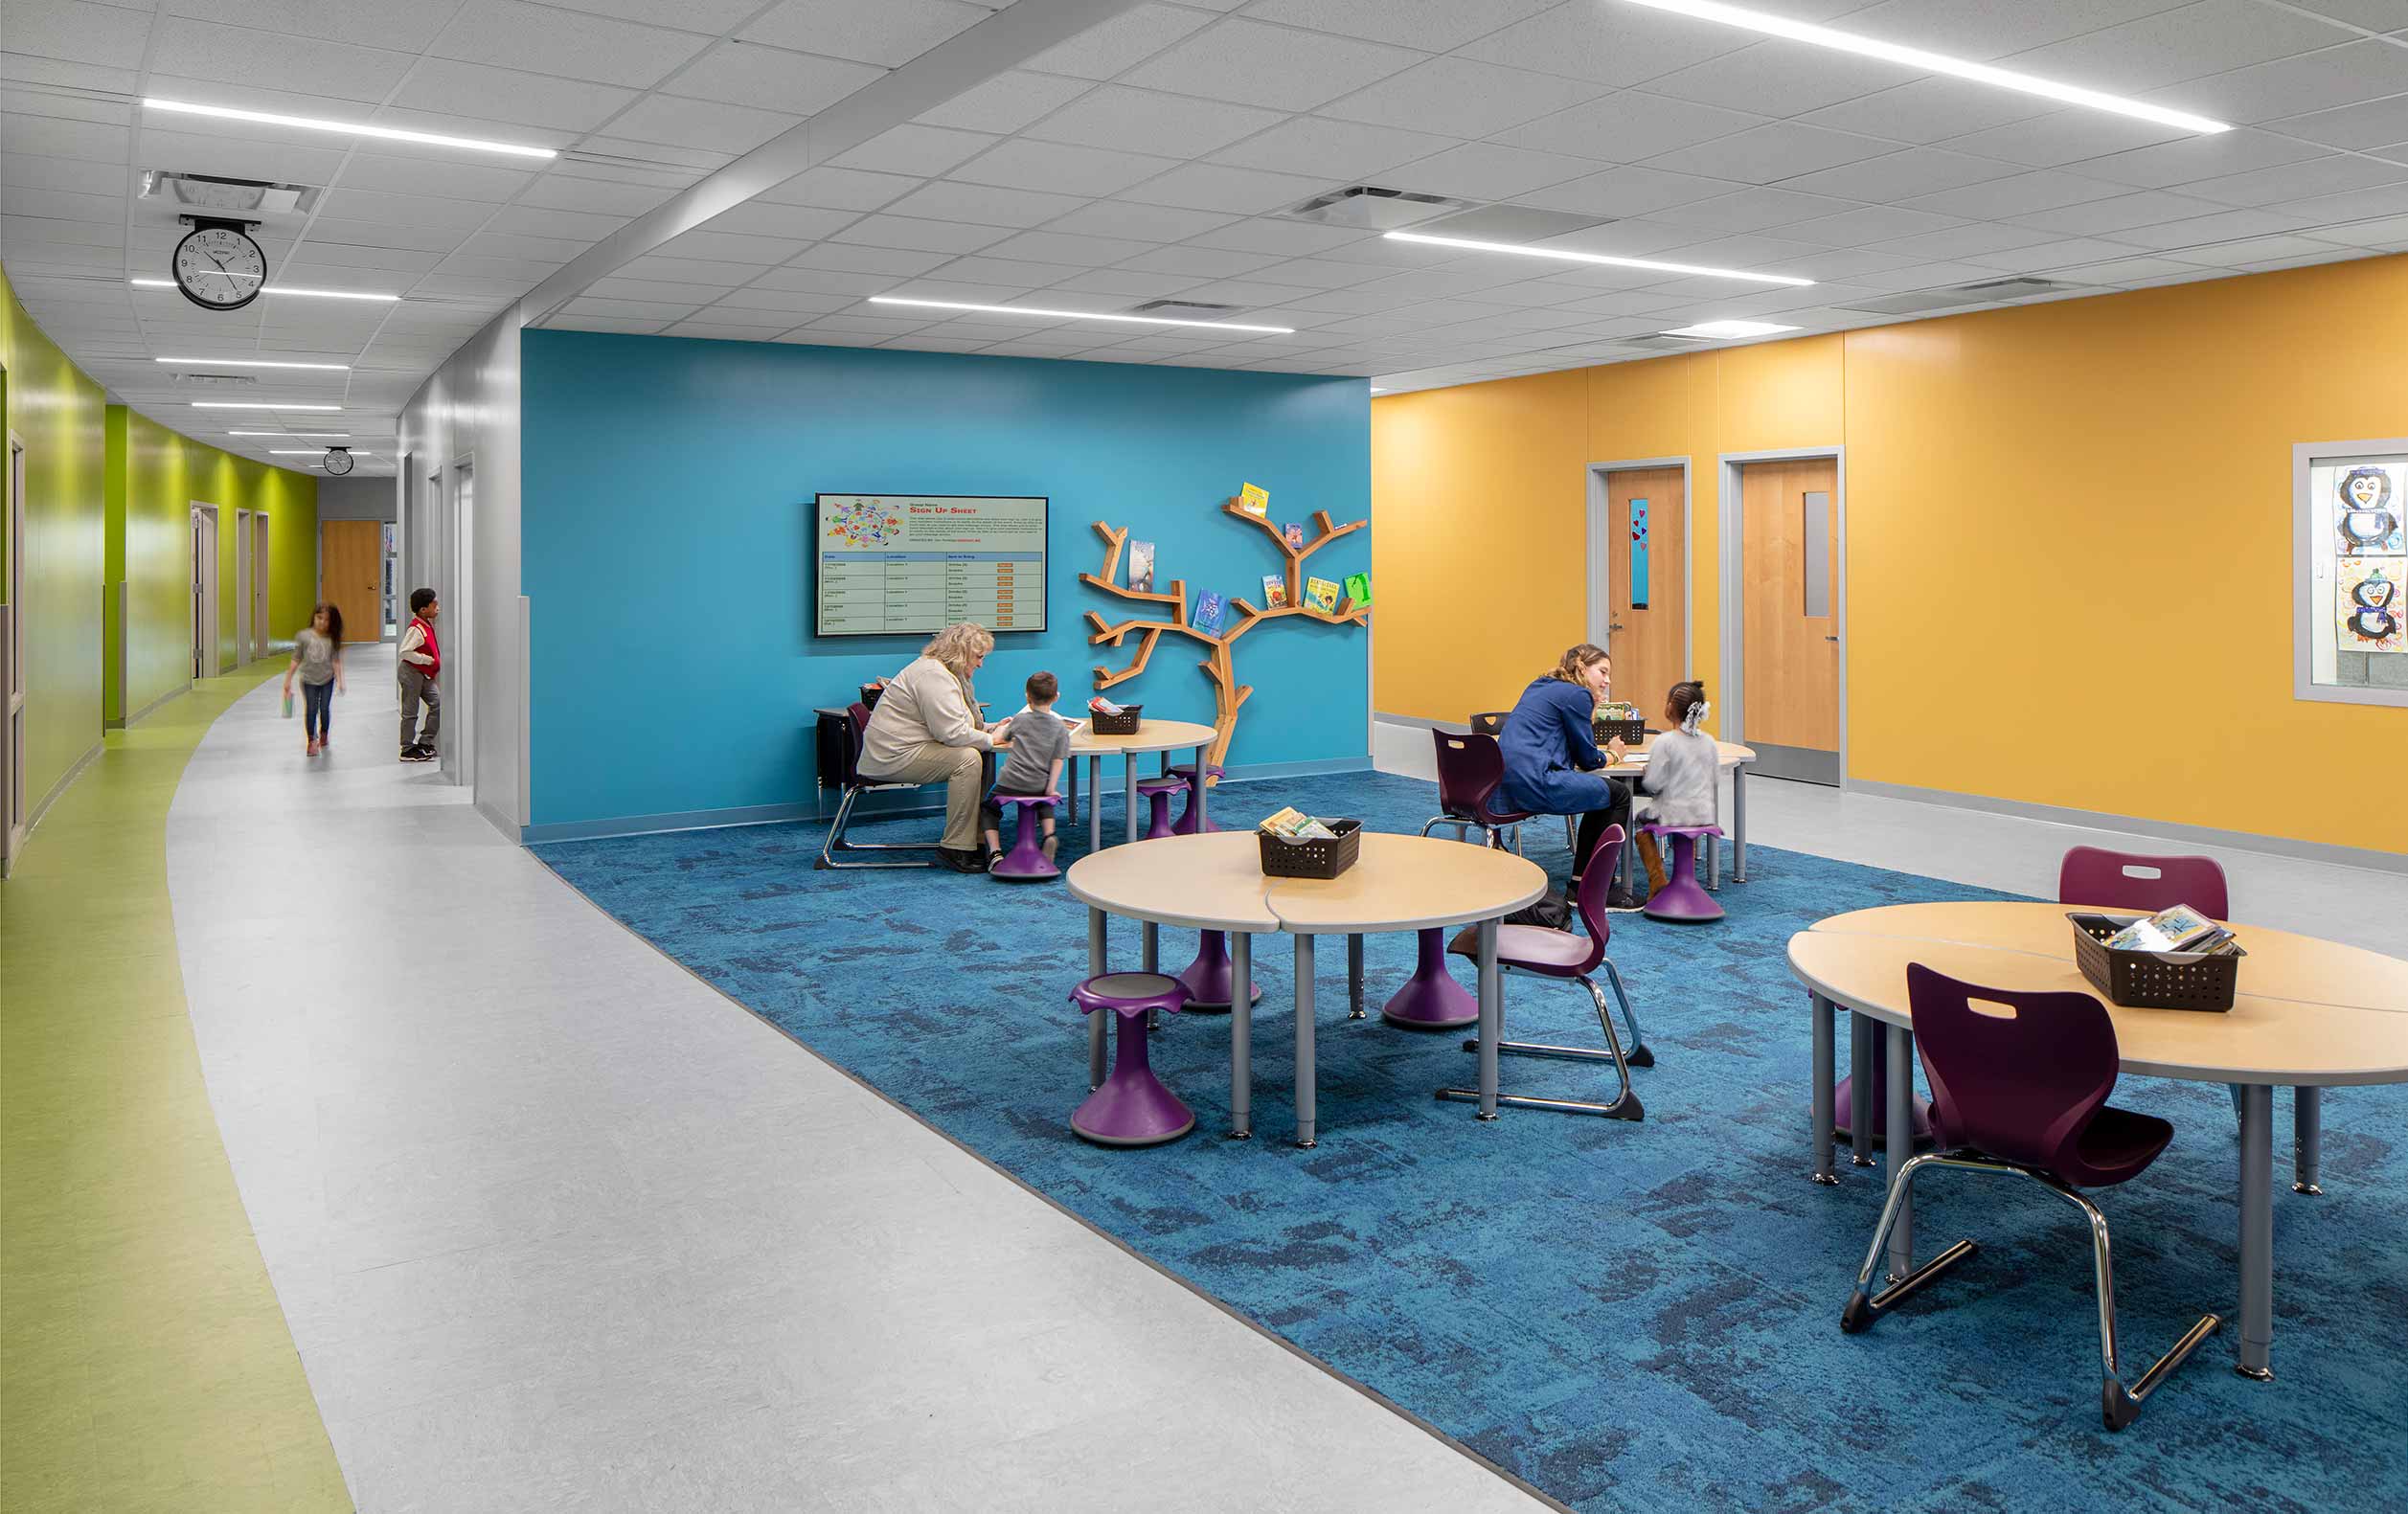 Colorful curving school corridor with students